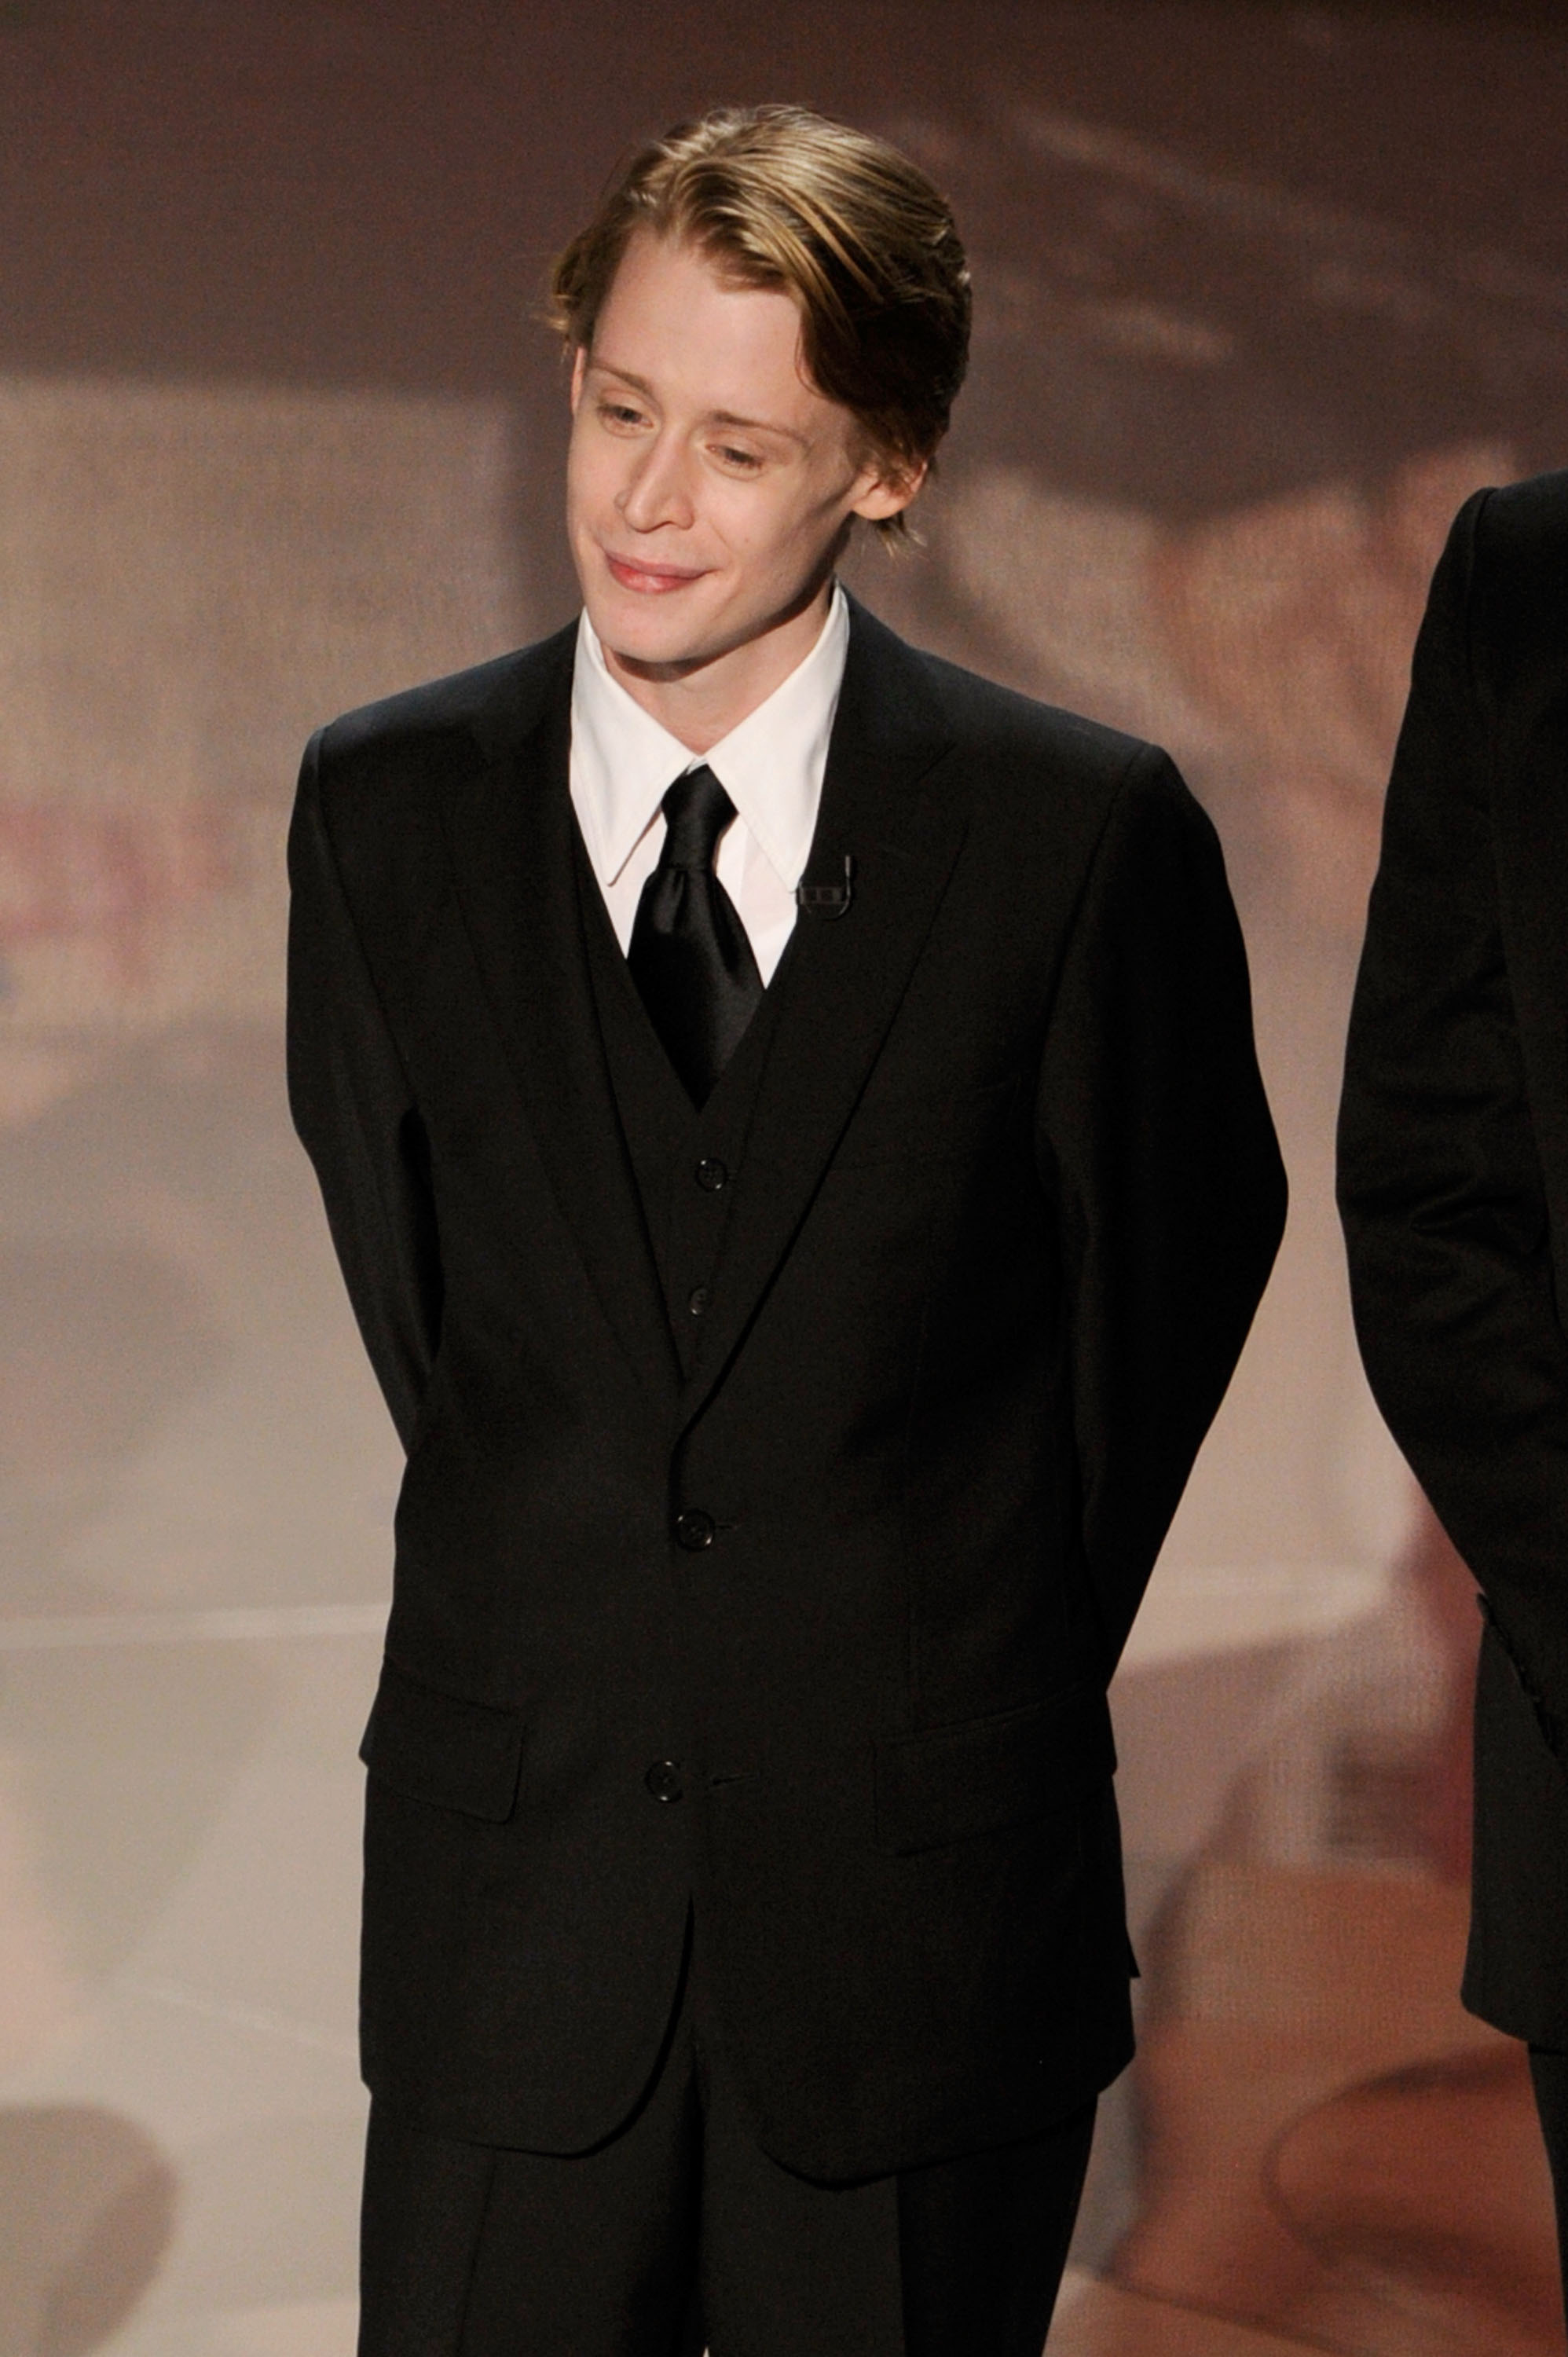 Macaulay Culkin at the 82nd Annual Academy Awards in Hollywood, California on March 7, 2010 | Source: Getty Images